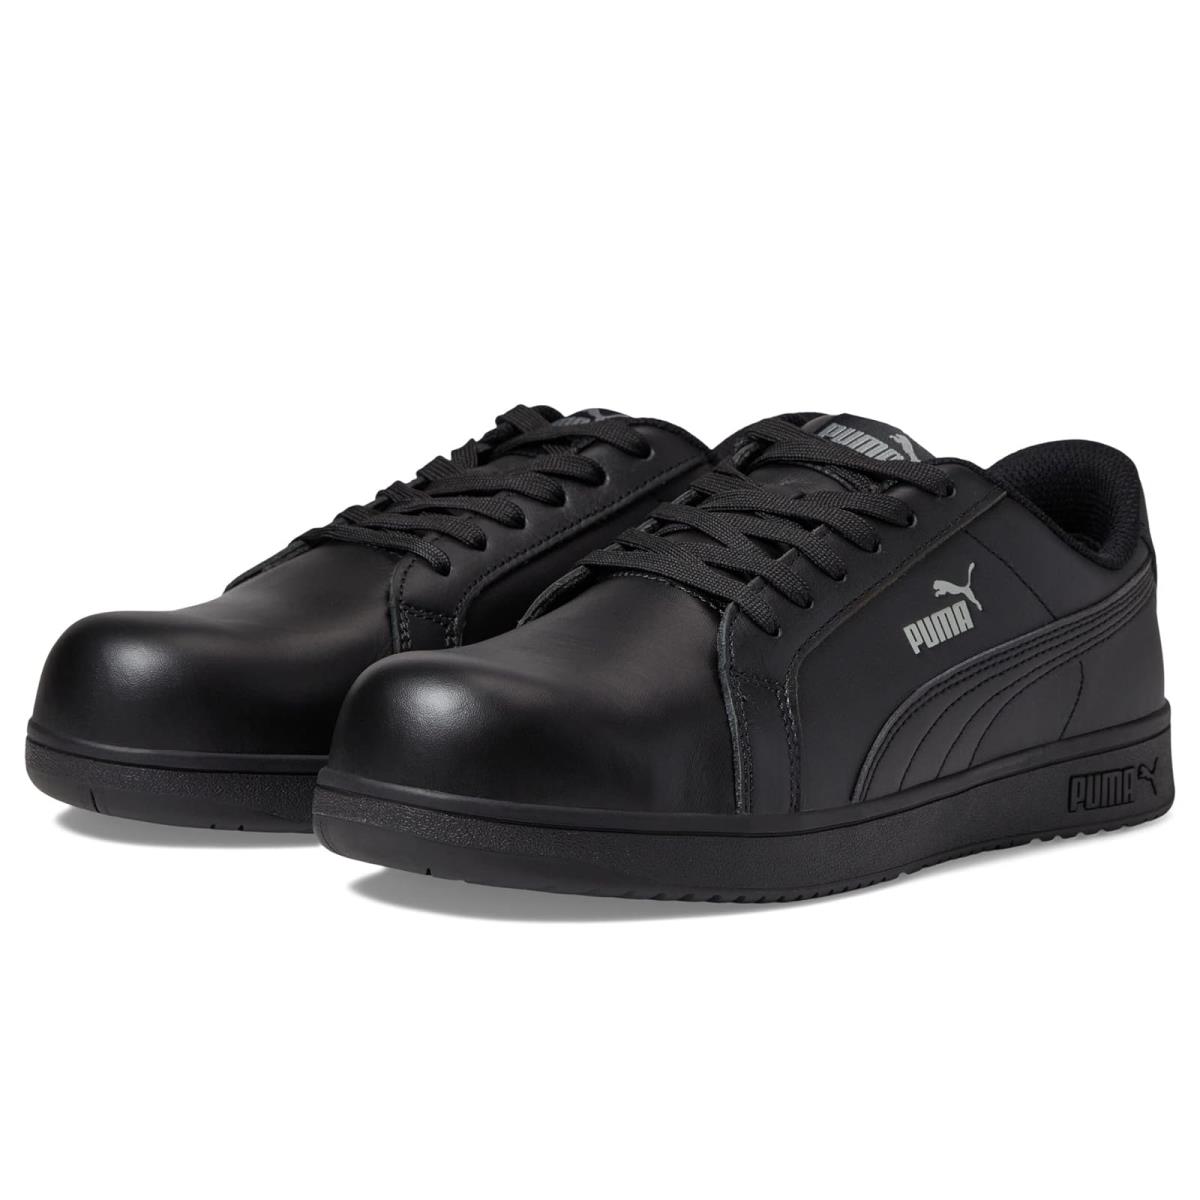 Man`s Sneakers Athletic Shoes Puma Safety Iconic Leather Low Astm SD Black/Black